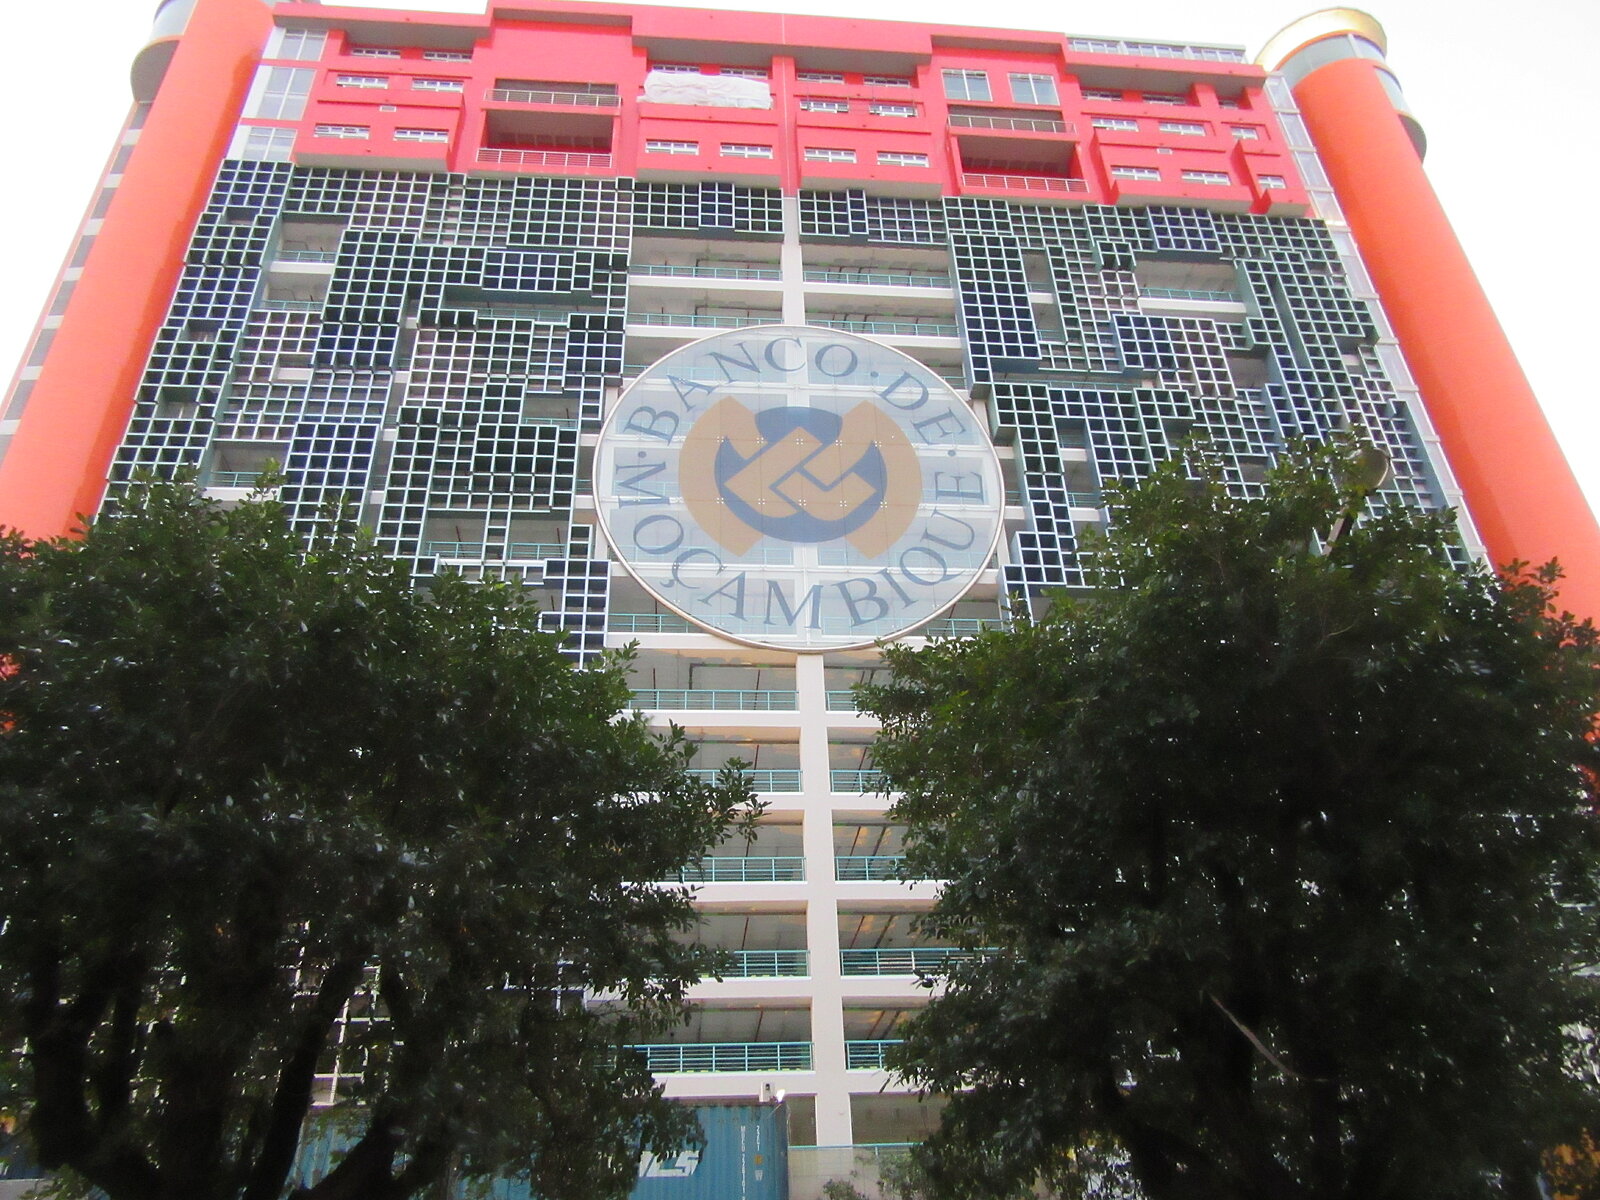 Building of Bank de Maosambik with logo in the middle and 2 trees left and right below